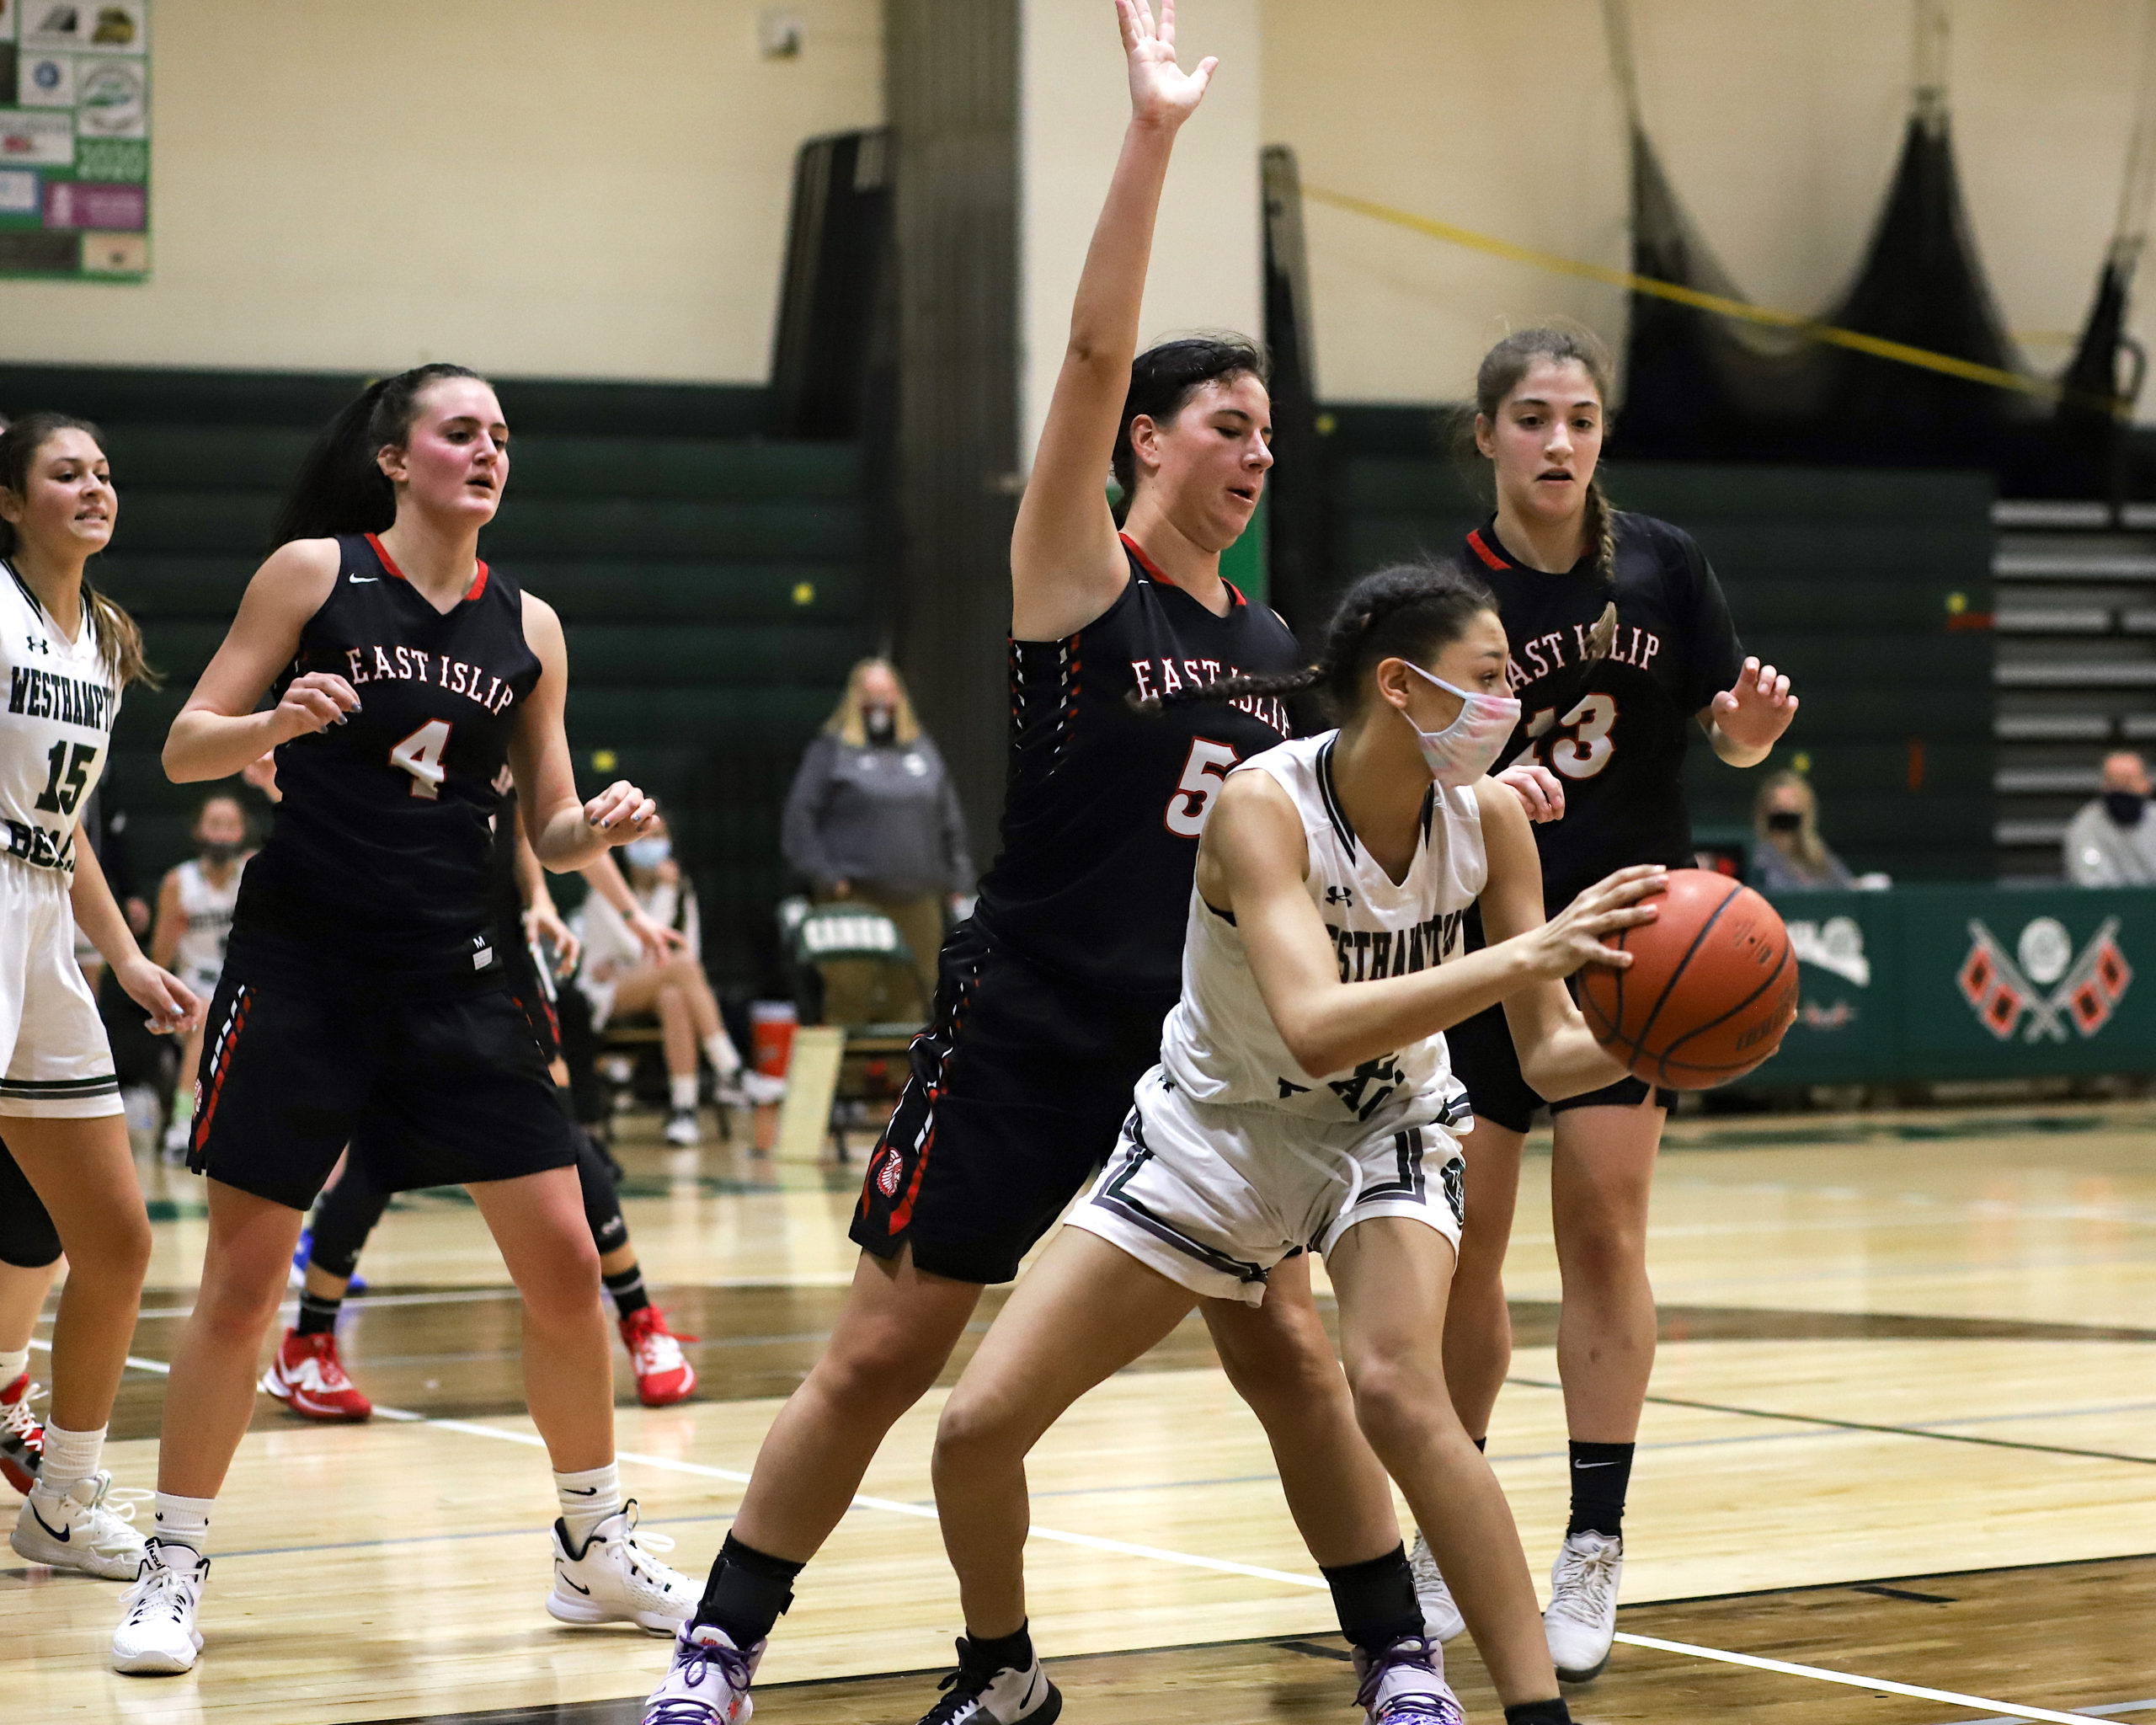 Westhampton Beach junior small forward Kylah Avery looks to get the ball out of traffic in a game last season. CHRISTINE HEEREN